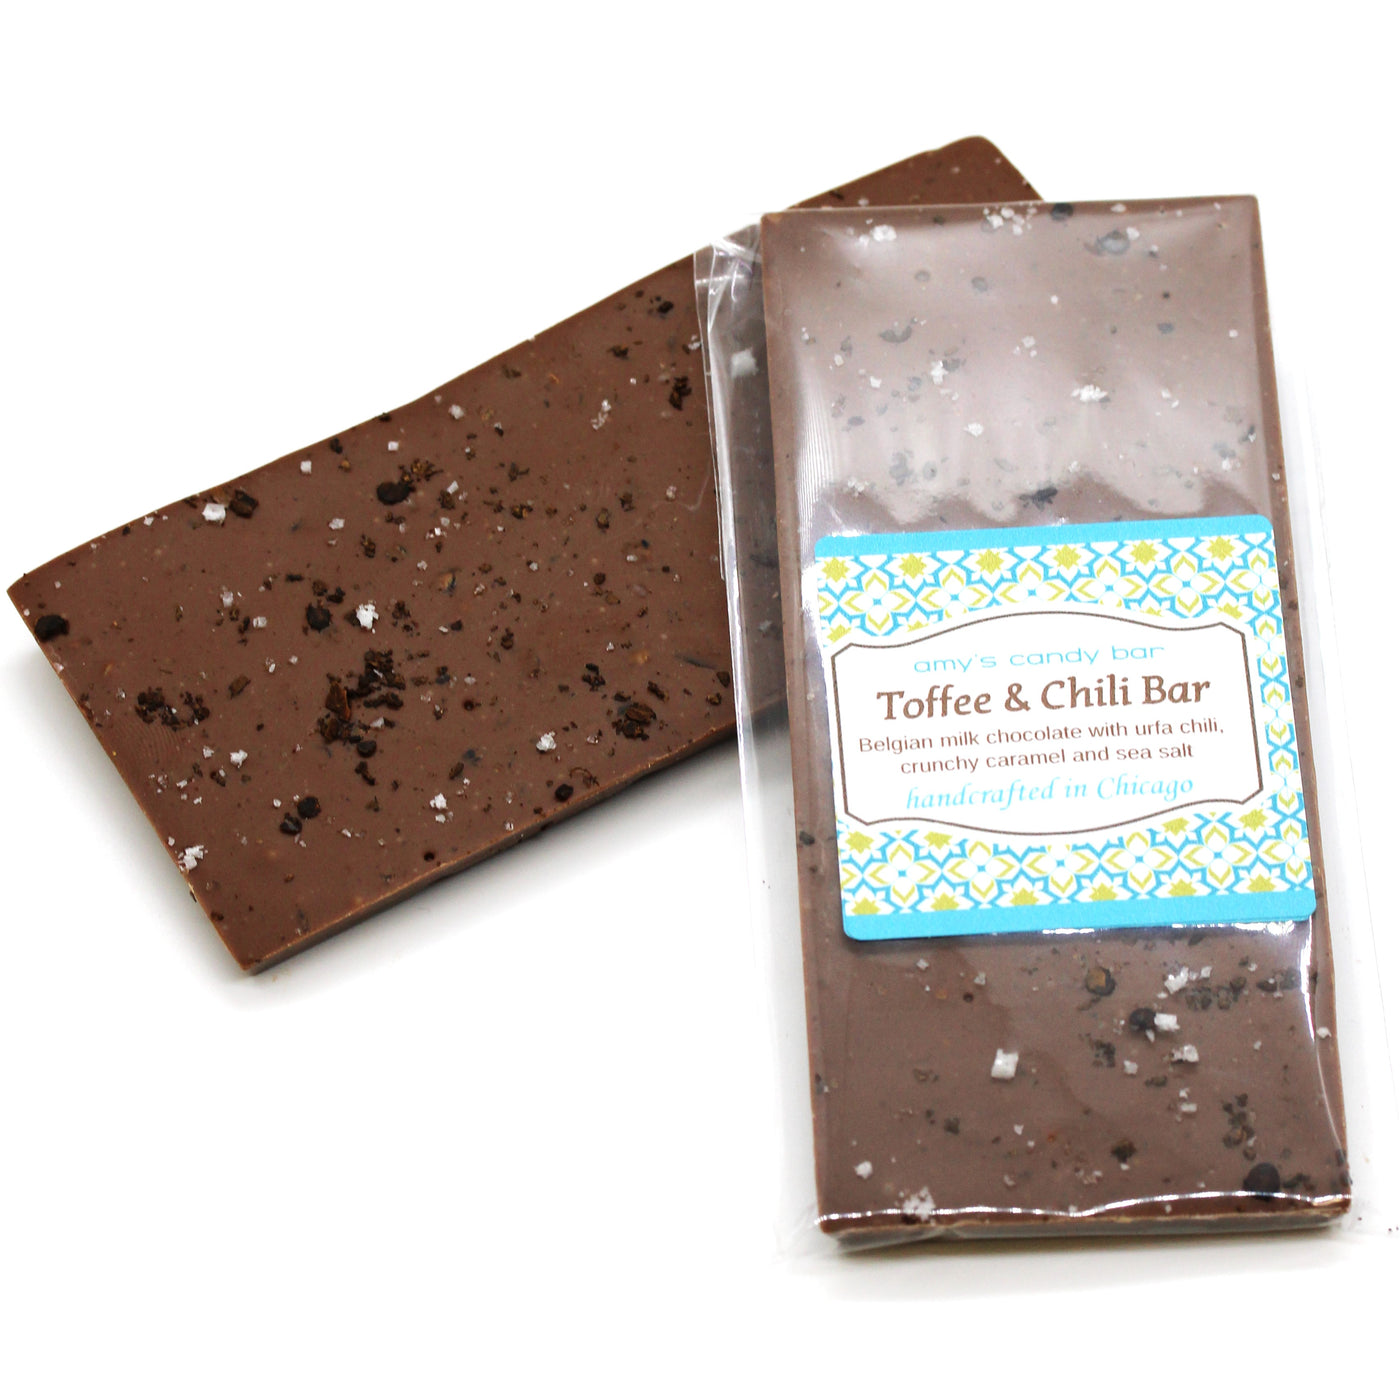 Toffee and Chili Bar